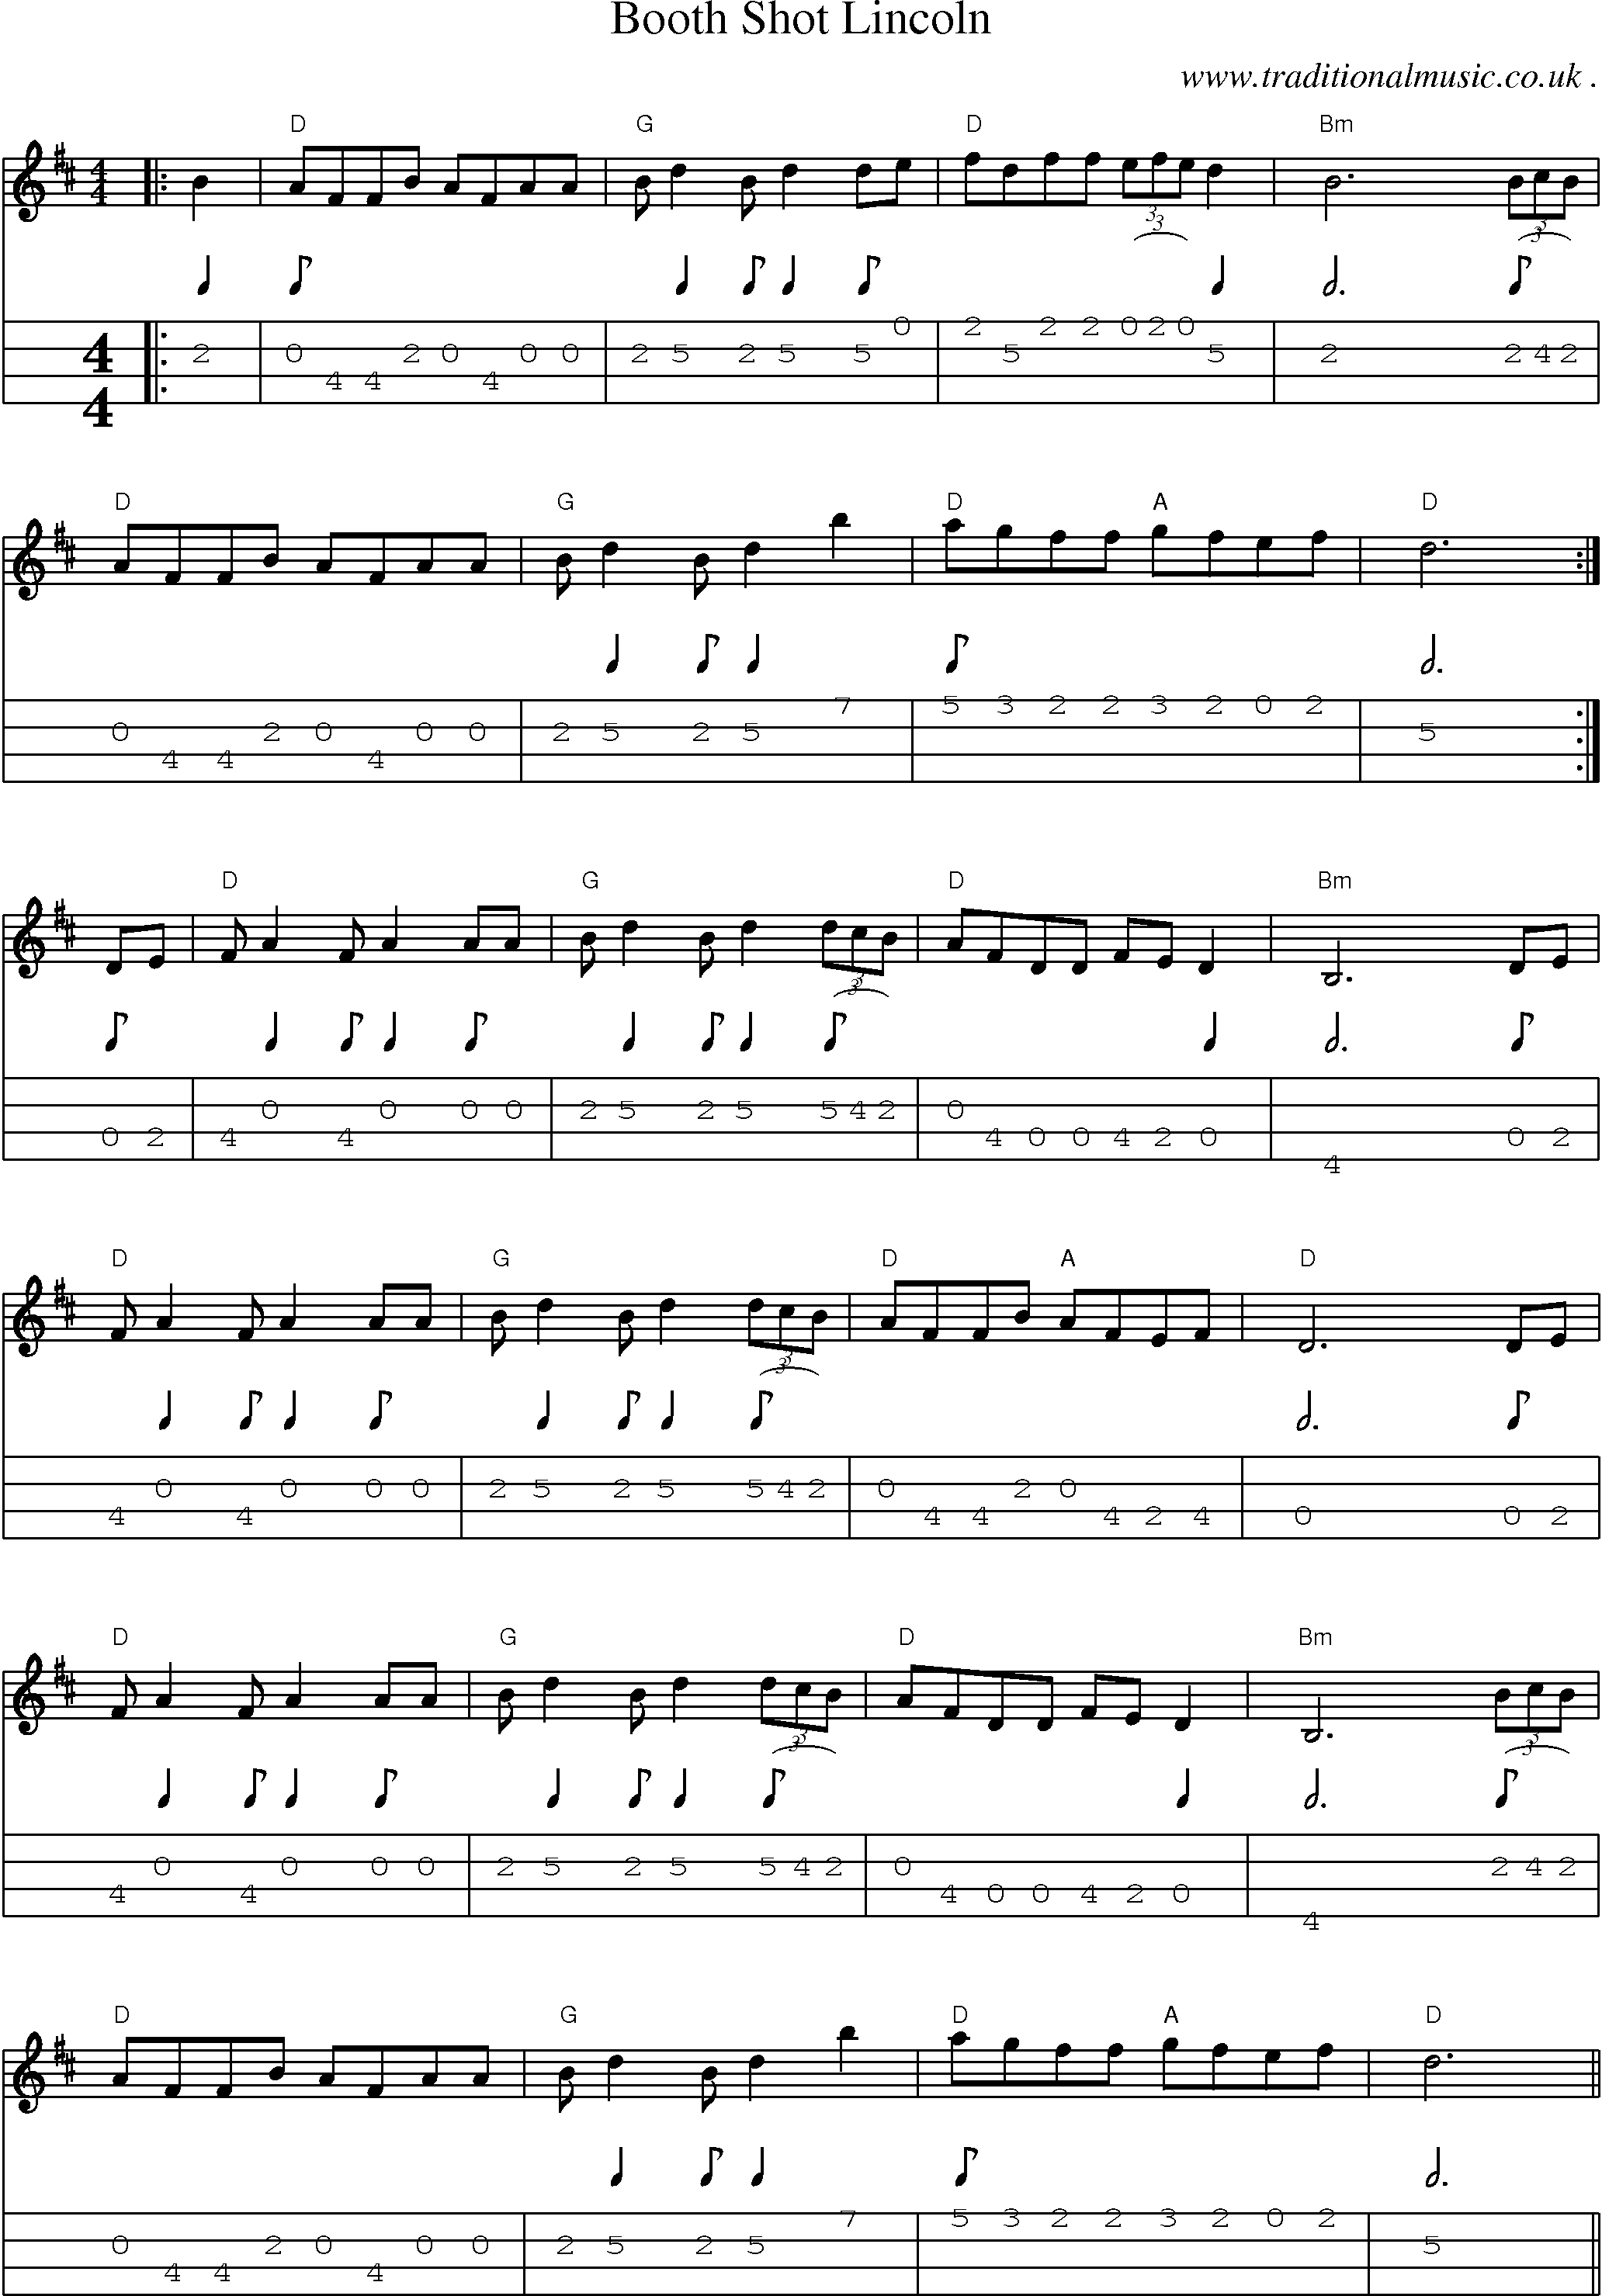 Music Score and Guitar Tabs for Booth Shot Lincoln